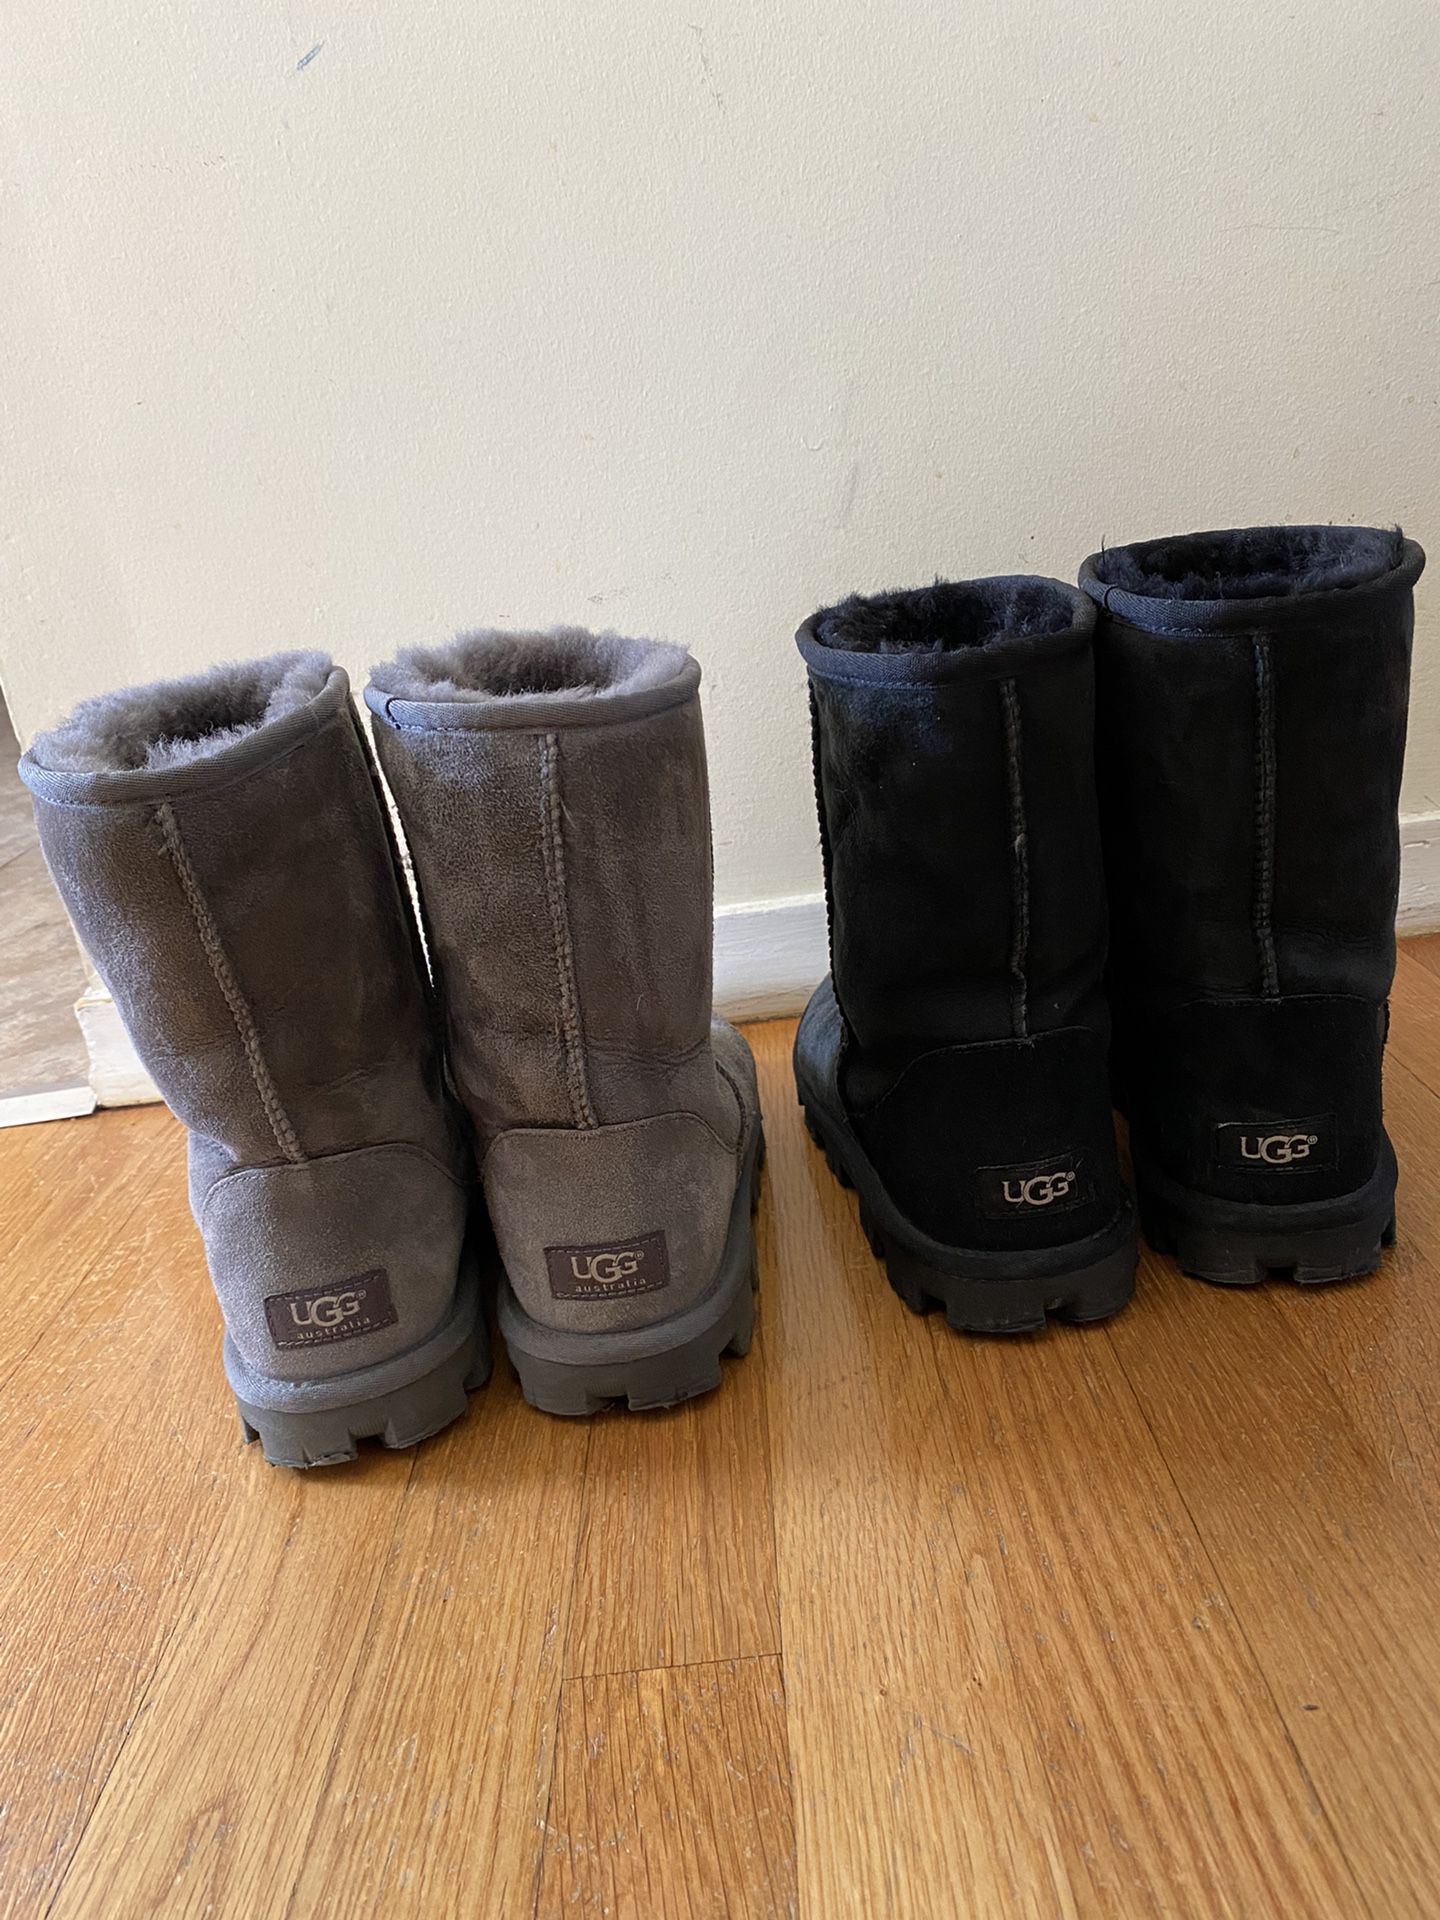 UGG Boots, Two Pairs, Size 9, Womens Boots